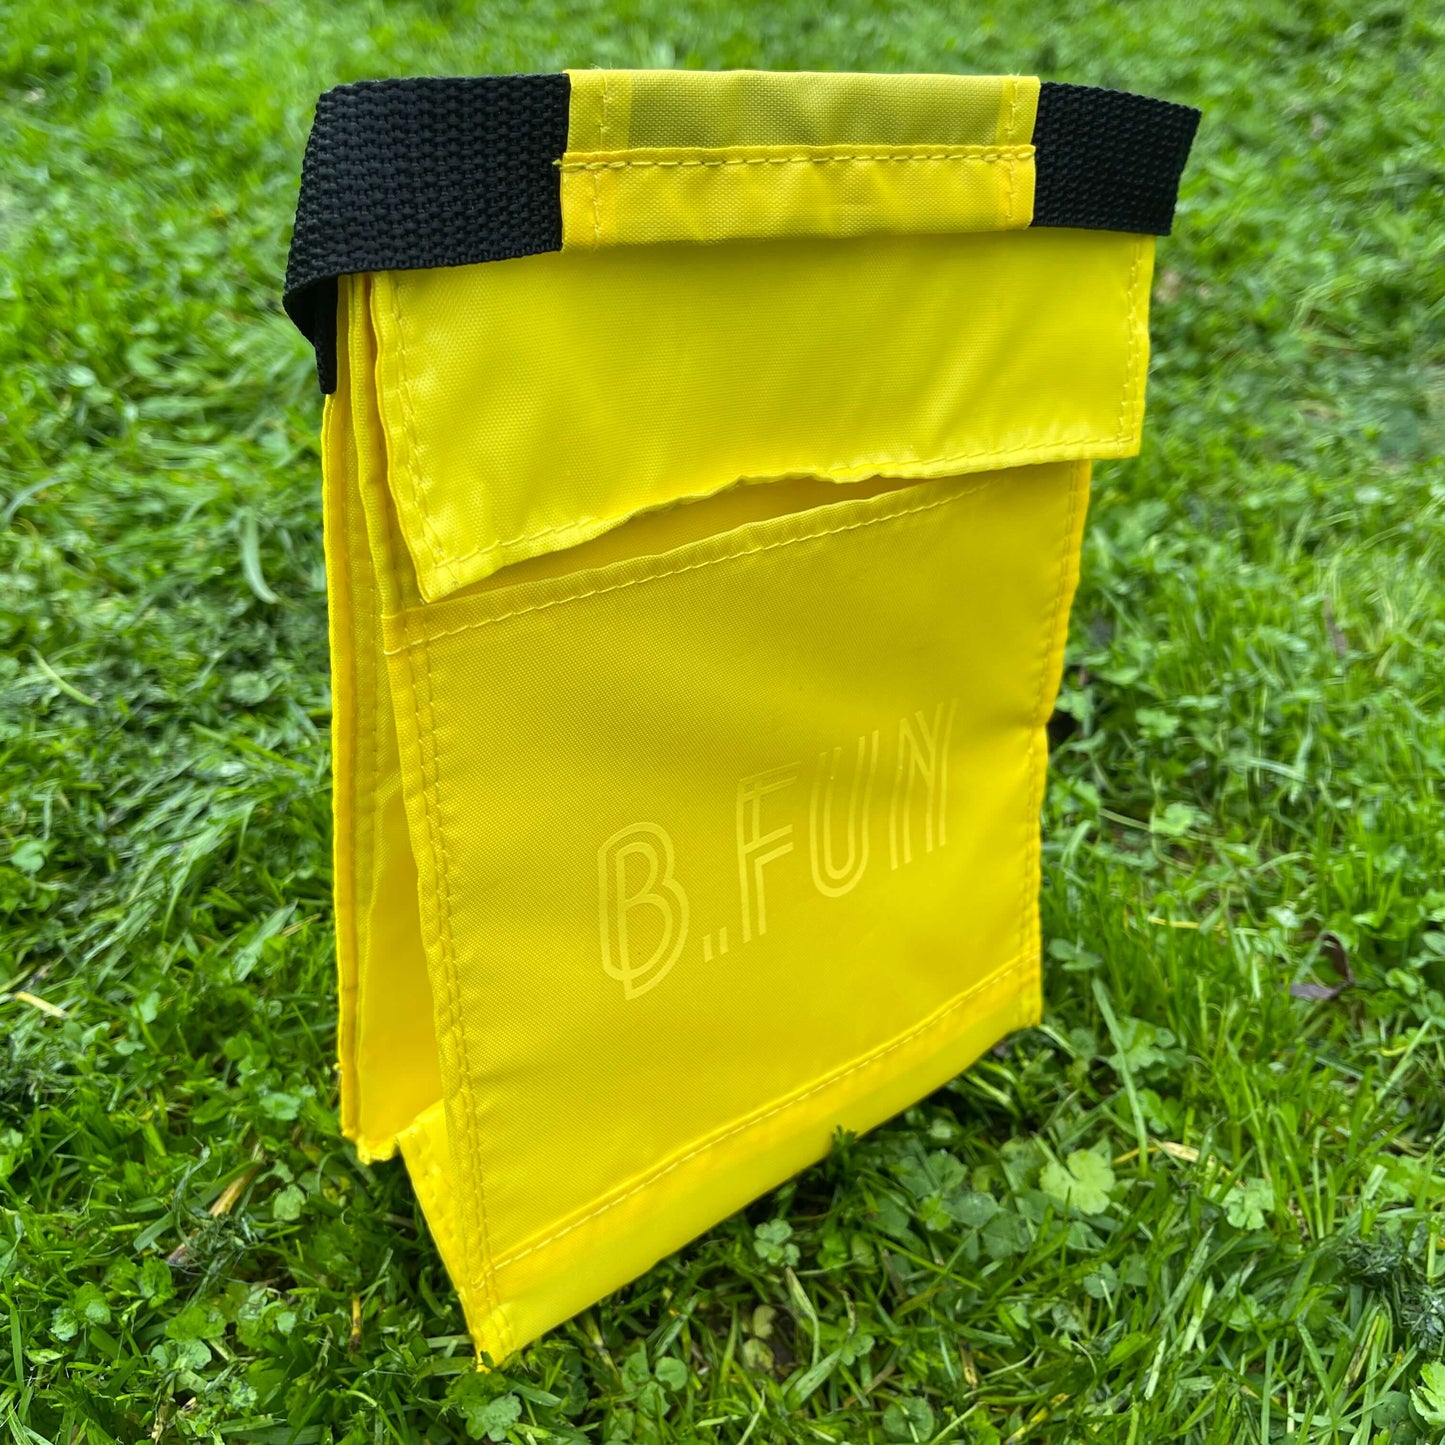 Insulated lunch carry bag in yellow with yellow text saying B.FUN sitting on green grass.